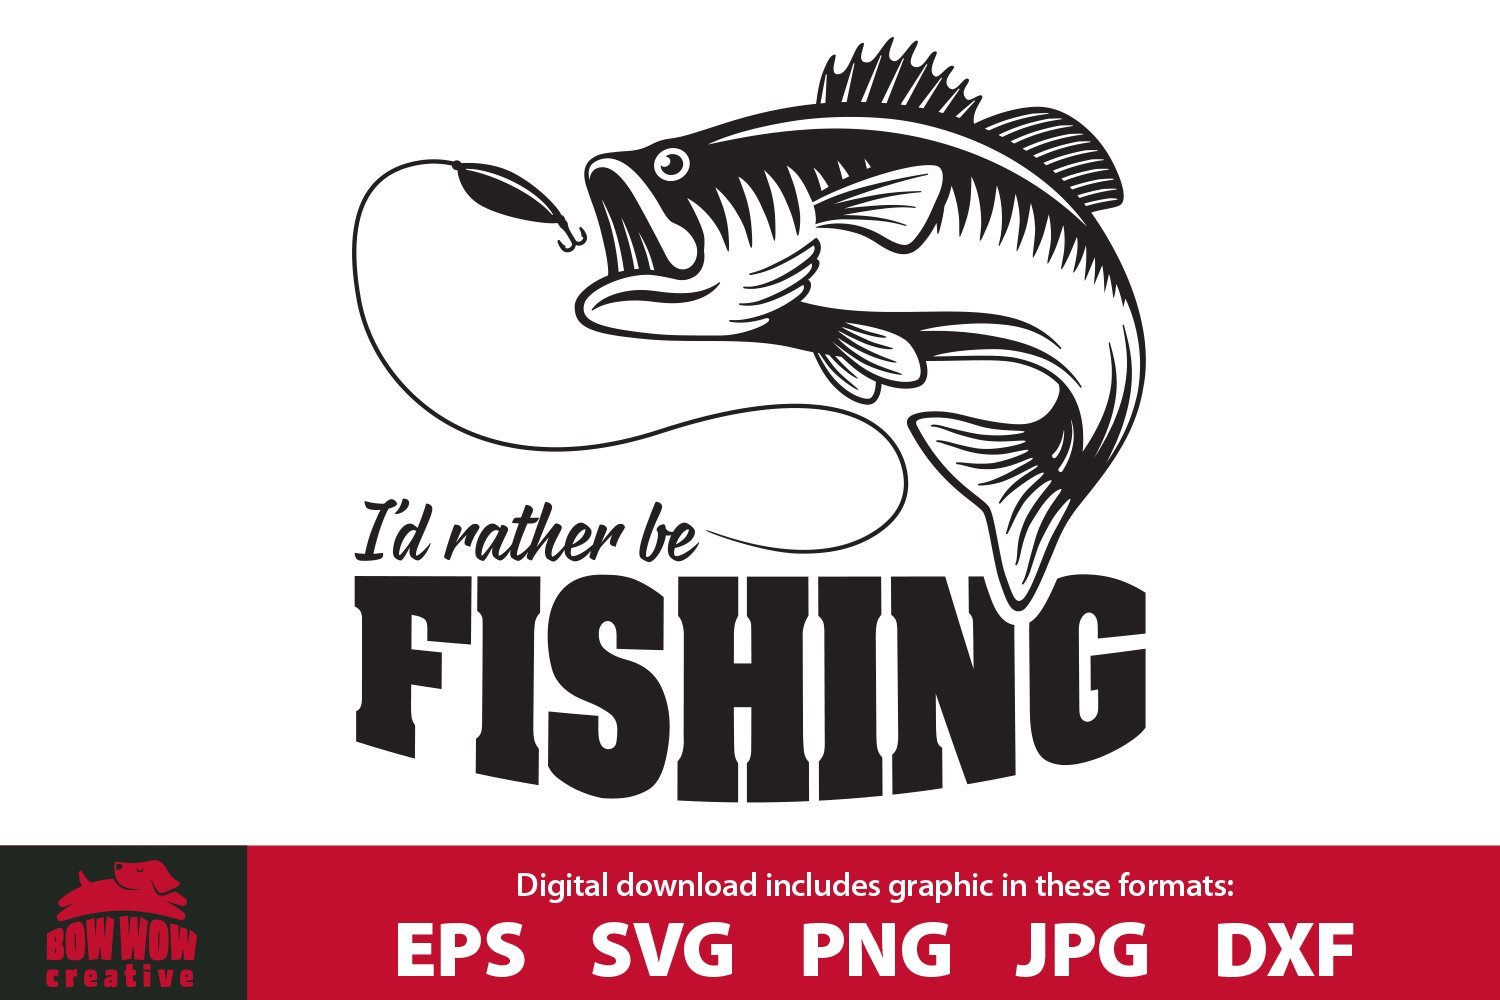 I'd Rather Be Fishing - SVG Cutting File - So Fontsy